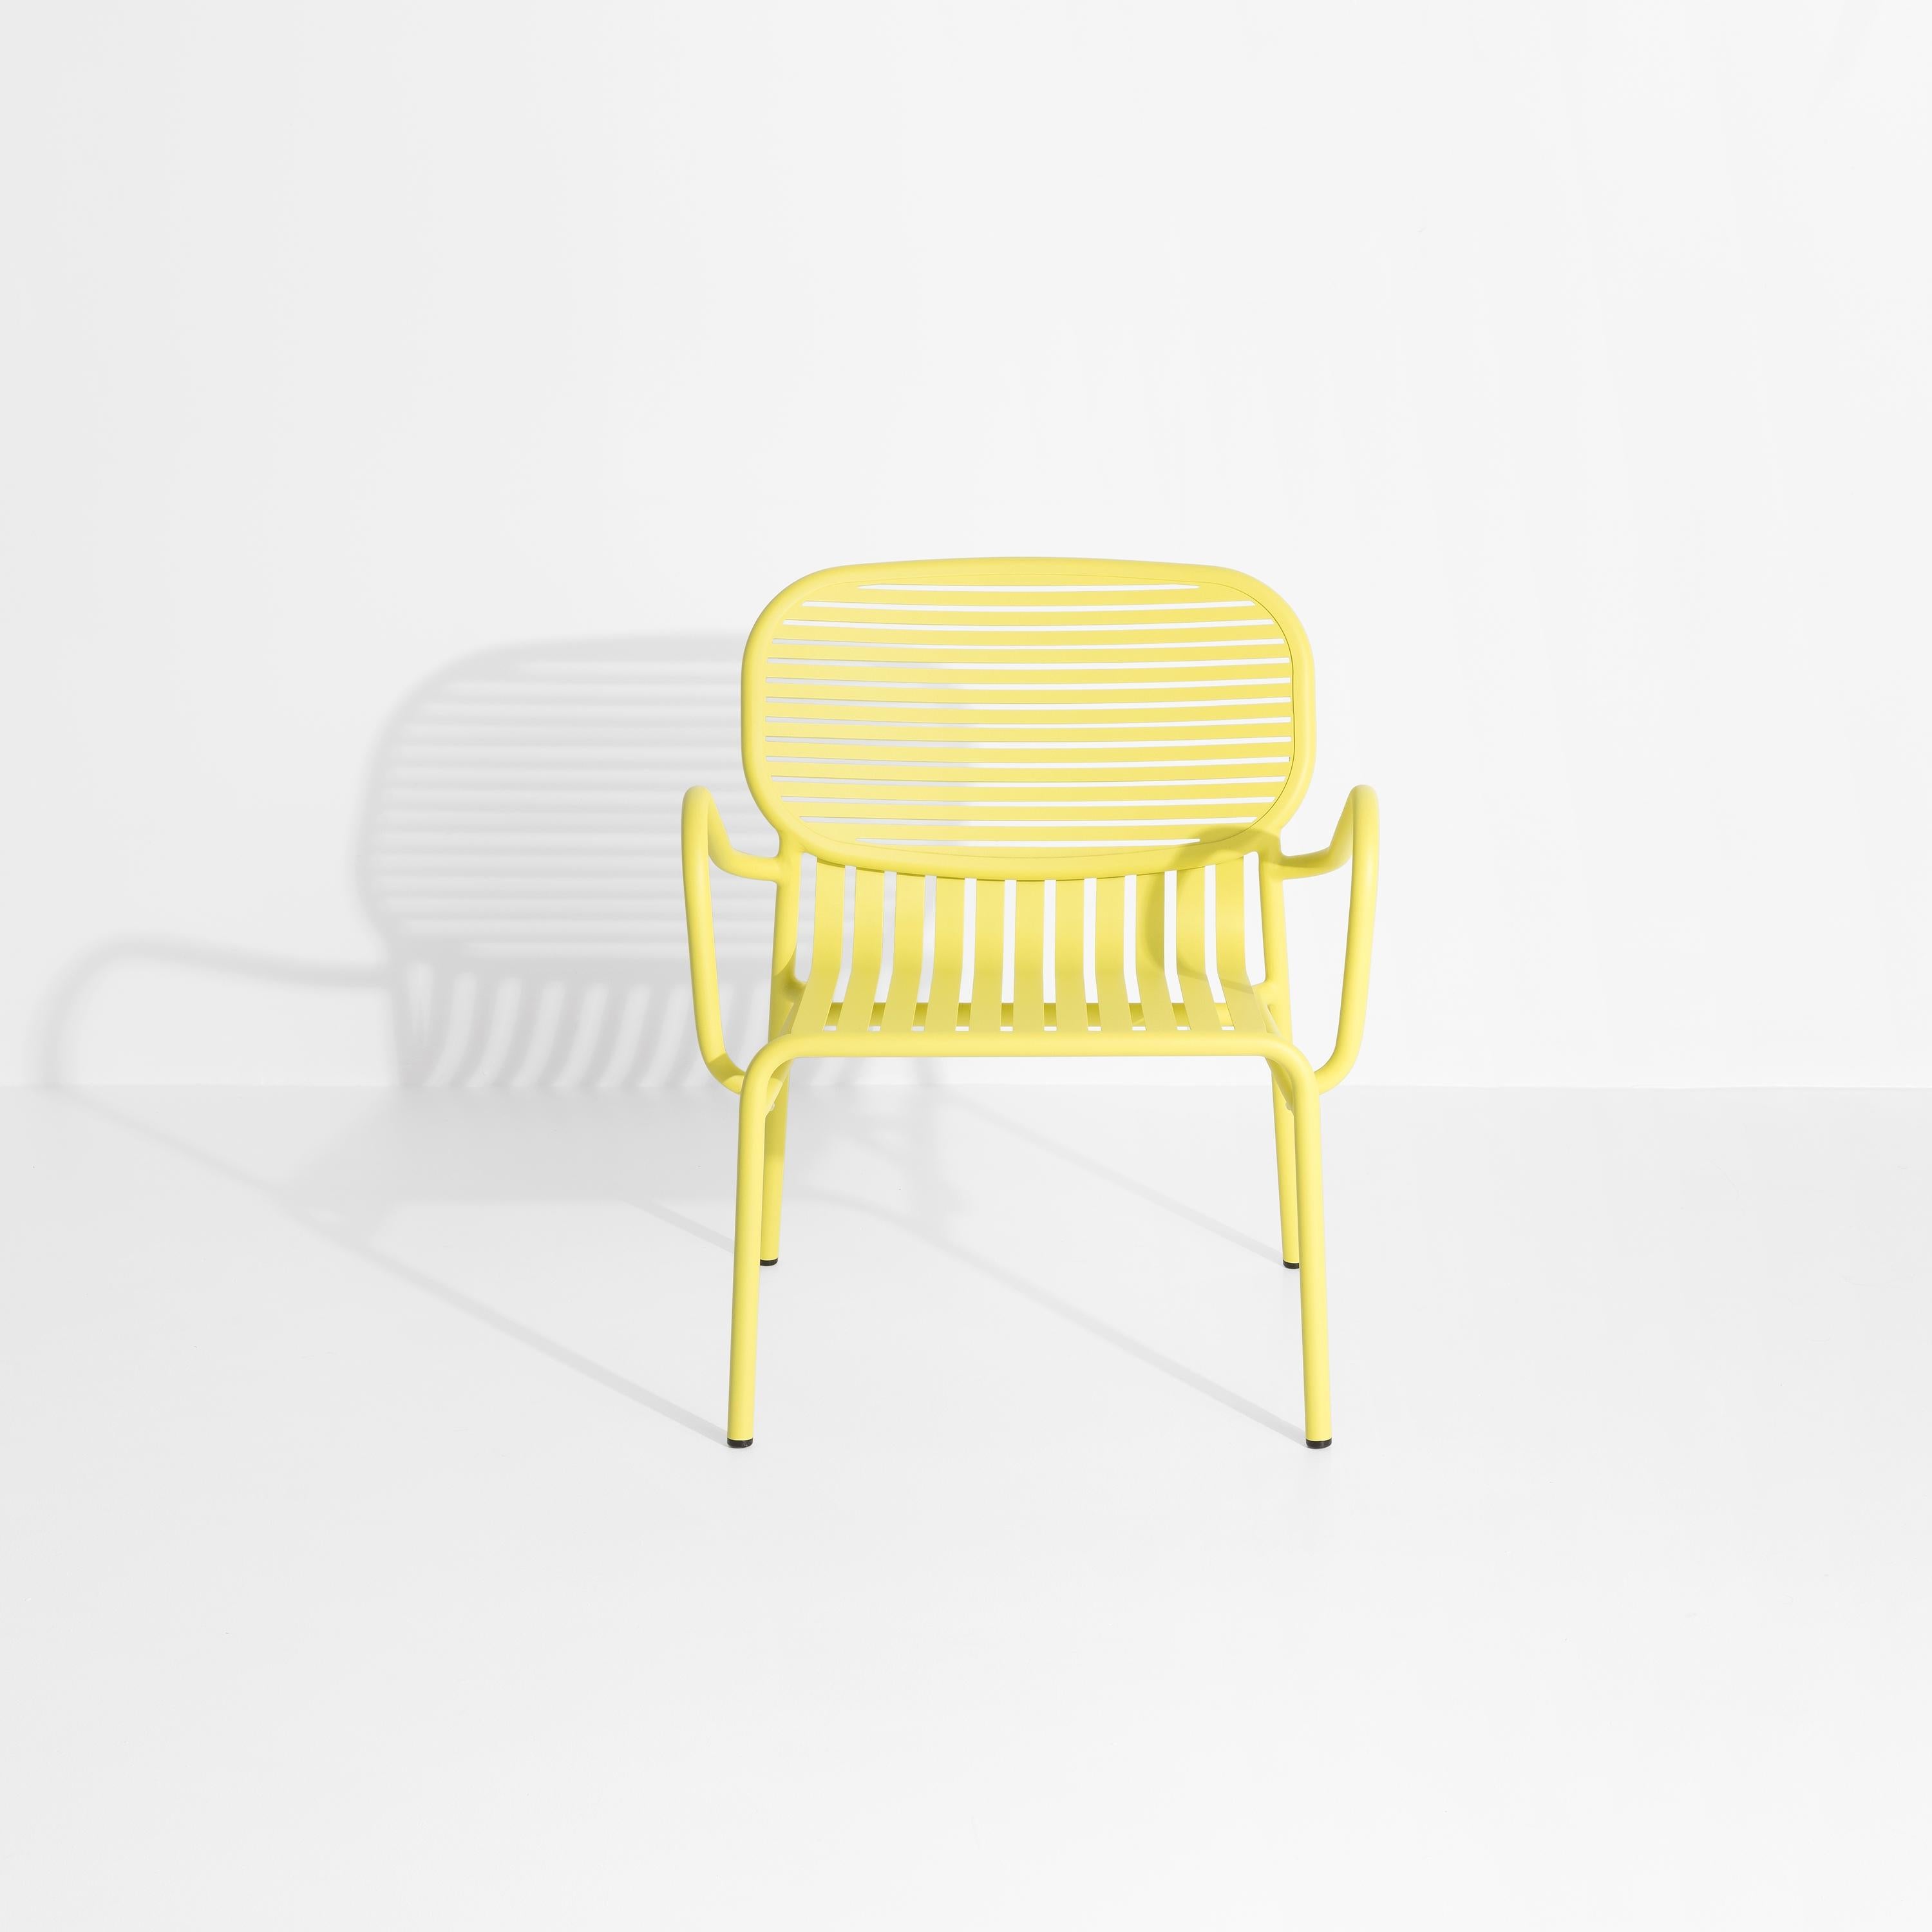 Petite Friture Week-End Armchair in Yellow Aluminium by Studio BrichetZiegler, 2017

The week-end collection is a full range of outdoor furniture, in aluminium grained epoxy paint, matt finish, that includes 18 functions and 8 colours for the